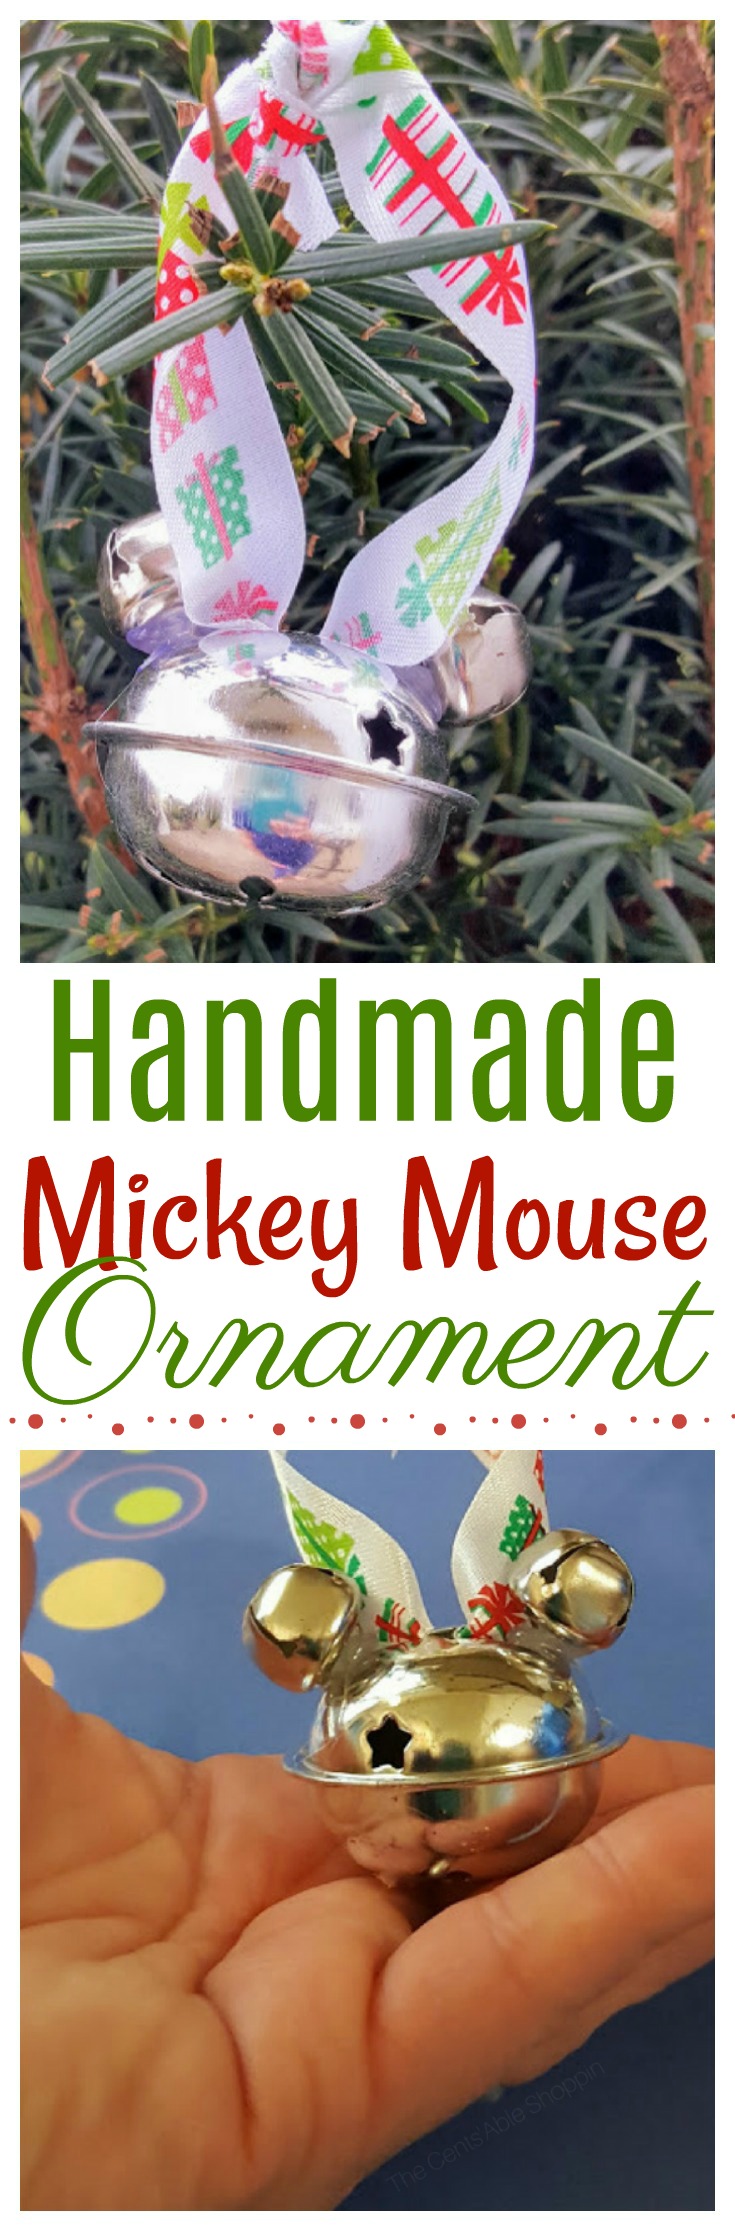 Christmas is near, and these Mickey Mouse Tree Ornaments are a super cute gift for the ultimate Minnie, or Mickey Mouse fan!   Whip up a dozen of these cute ornaments for less than $4!  #MickeyMouse #Christmas #Ornament #Craft